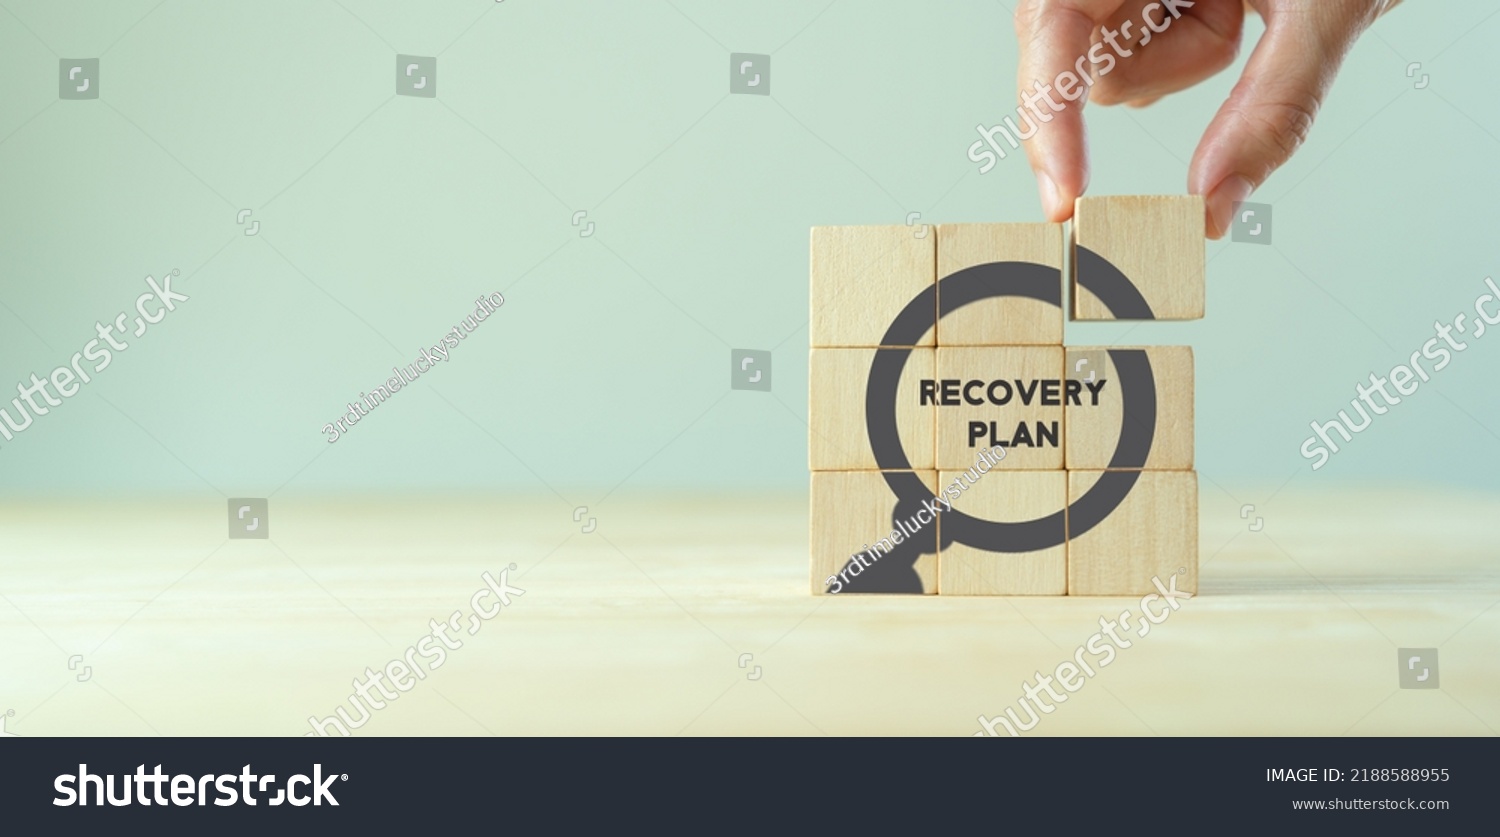 Recovery plan in recession. Strengthen business in economic downturn. Making customers priority, marketing strategies, managing staff, networking, develop innovative practices, seek assistance. #2188588955